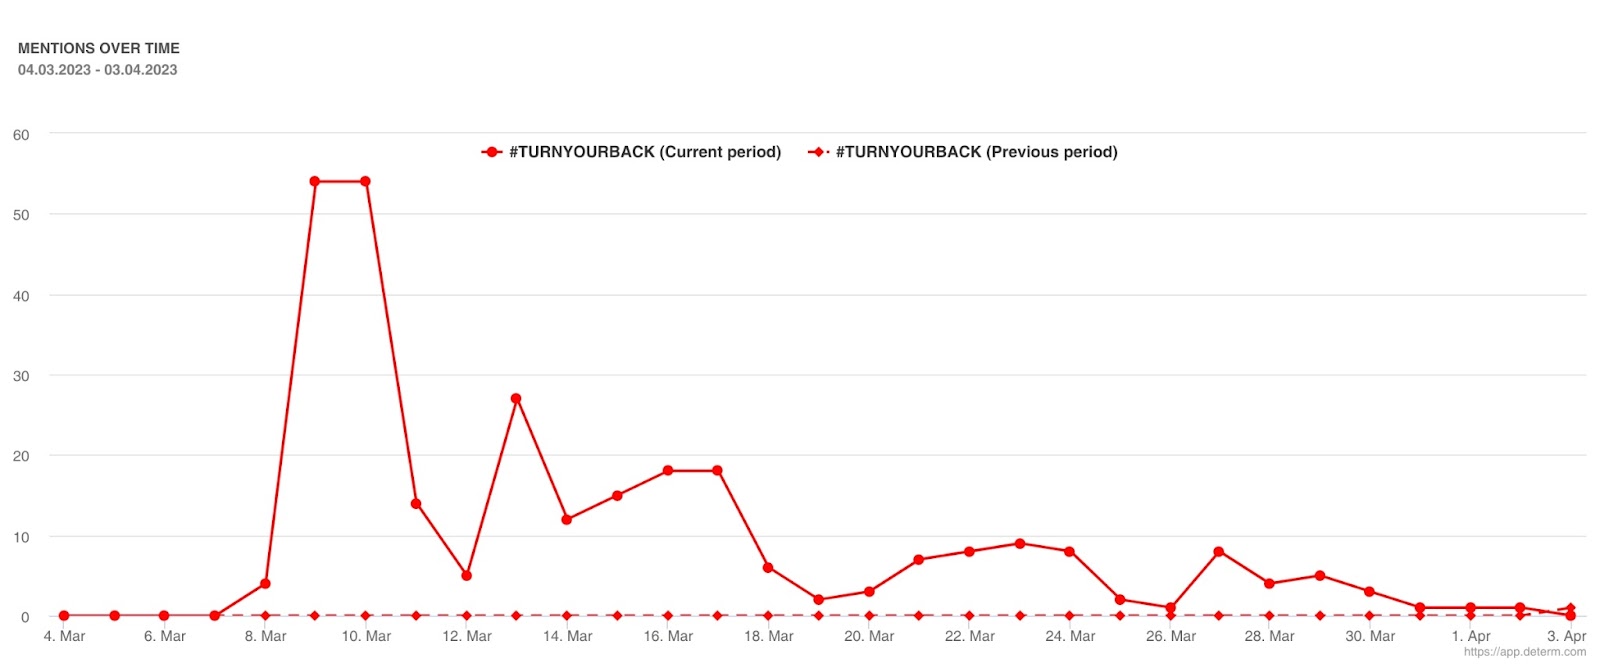 Mentions over time for Dove's #TurnYourBack campaign